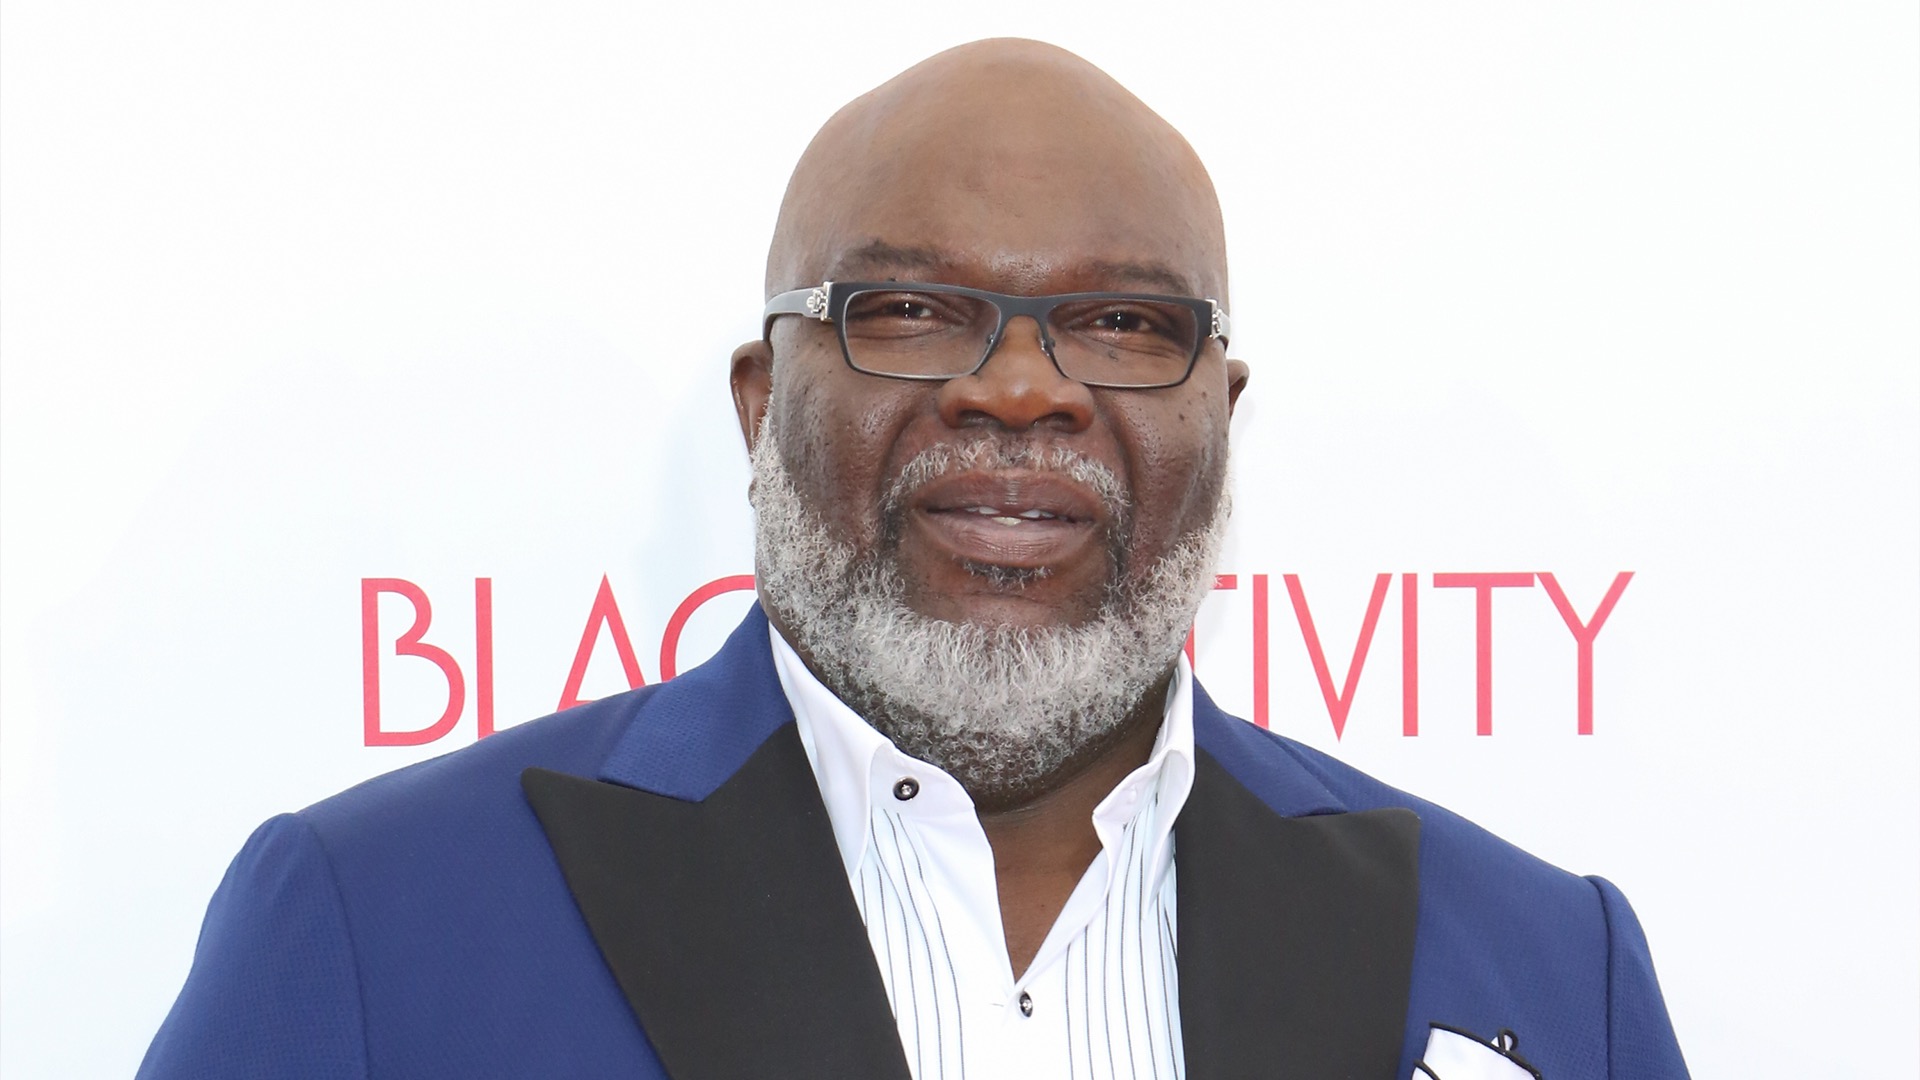 T.D. Jakes Real Estate Ventures Presents 'Master Plan' For Land Near Tyler Perry Studios